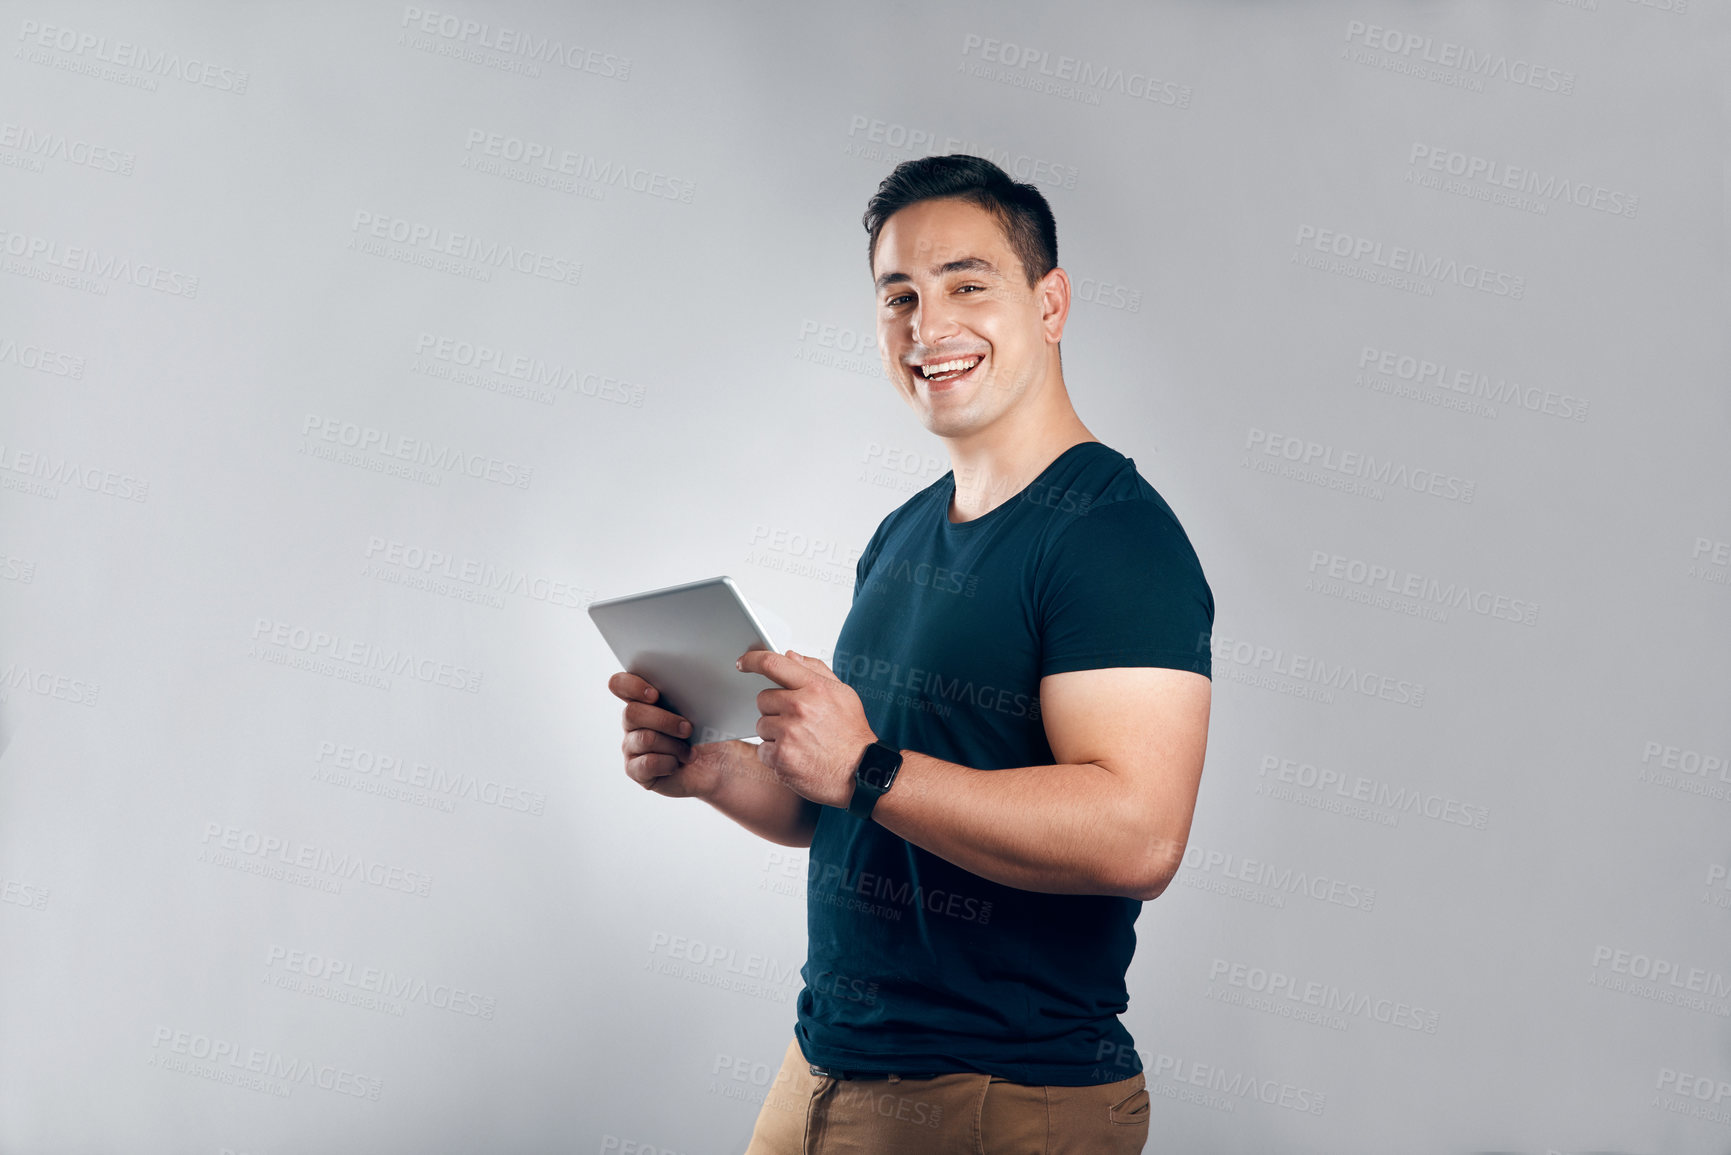 Buy stock photo Studio shot of a handsome young man posing with a tablet against a grey background